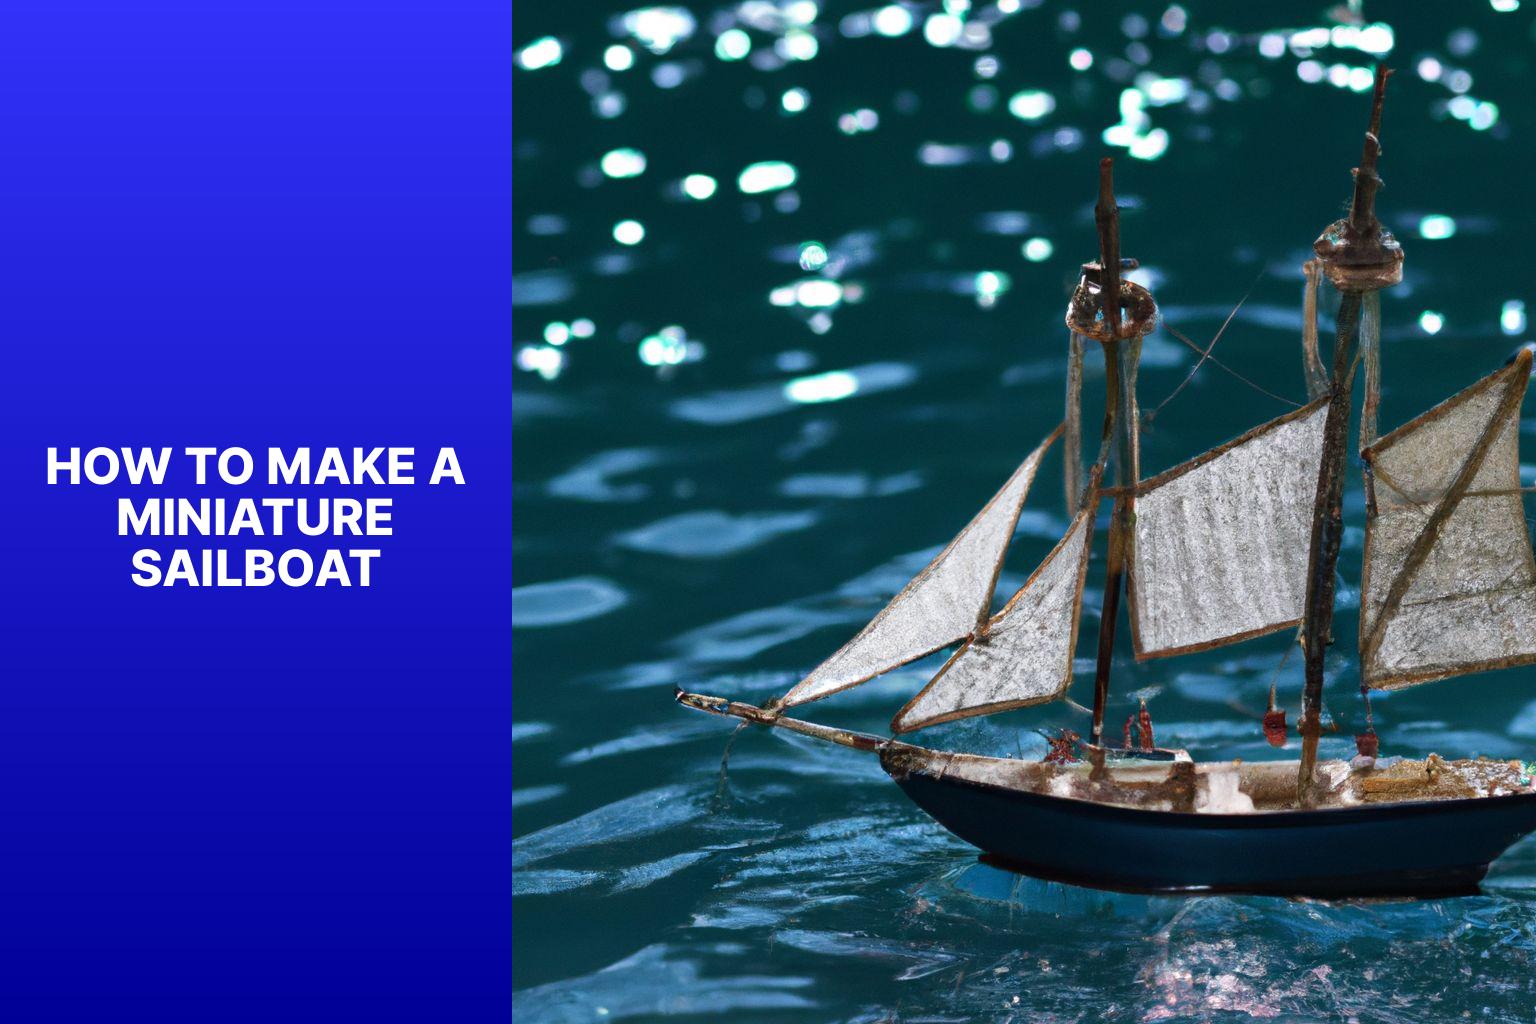 Learn How to Make a Miniature Sailboat | Step-by-Step Guide